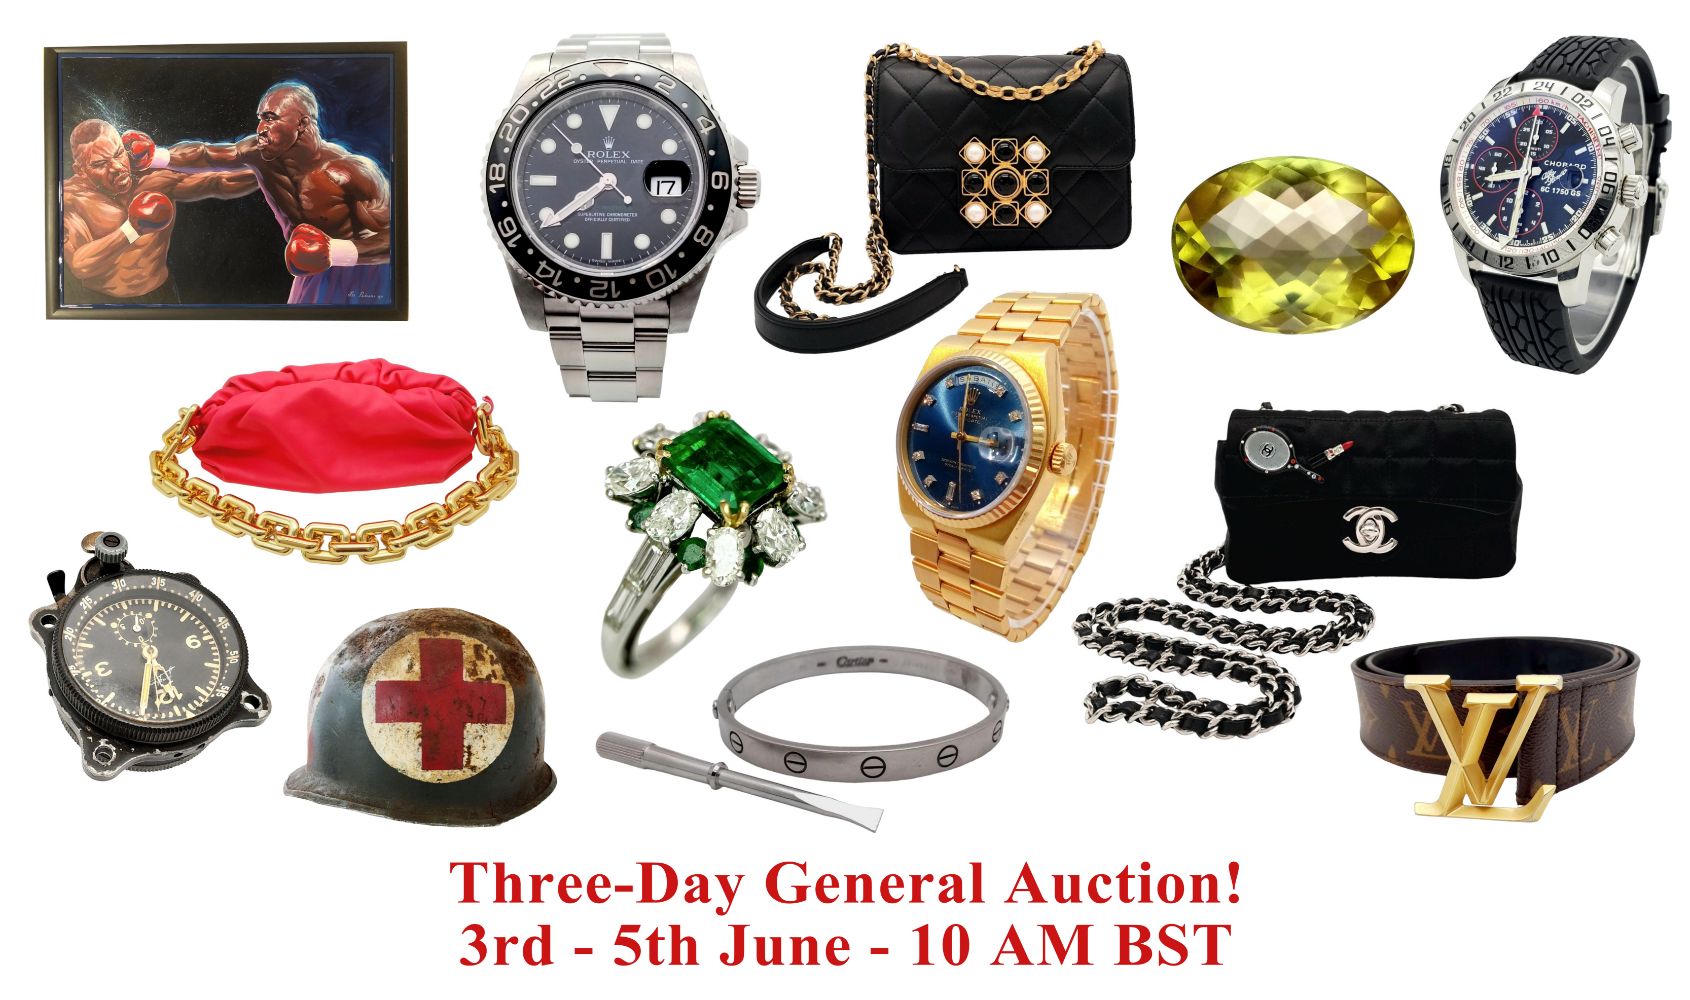 Three-Day General Auction (Jewellery, Watches, Designer Items, Militaria, Antiques and Collectables) Catalogue Updated Daily!